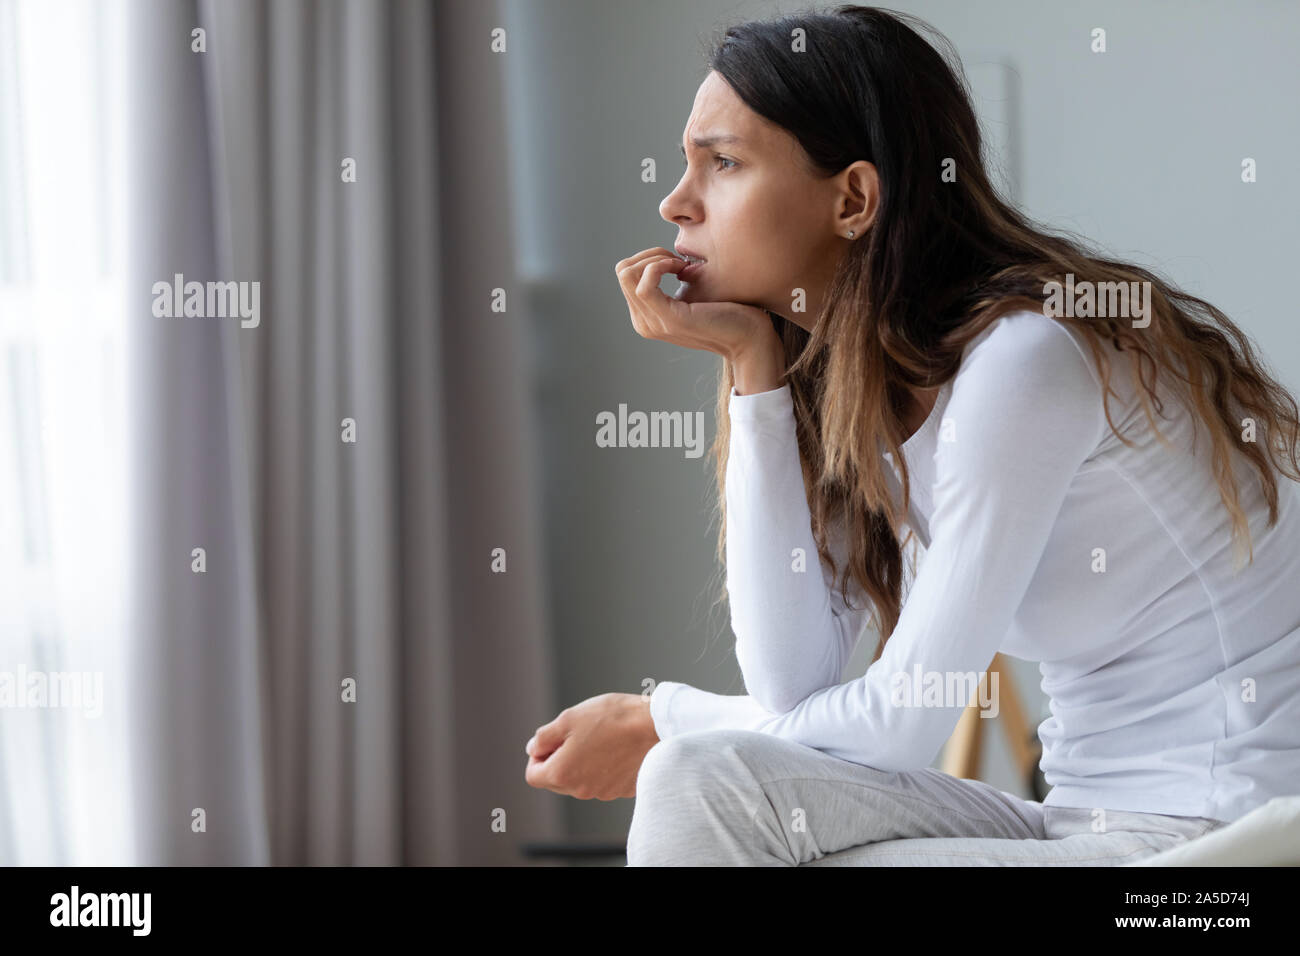 Confused anxious young mixed race woman biting nails. Stock Photo